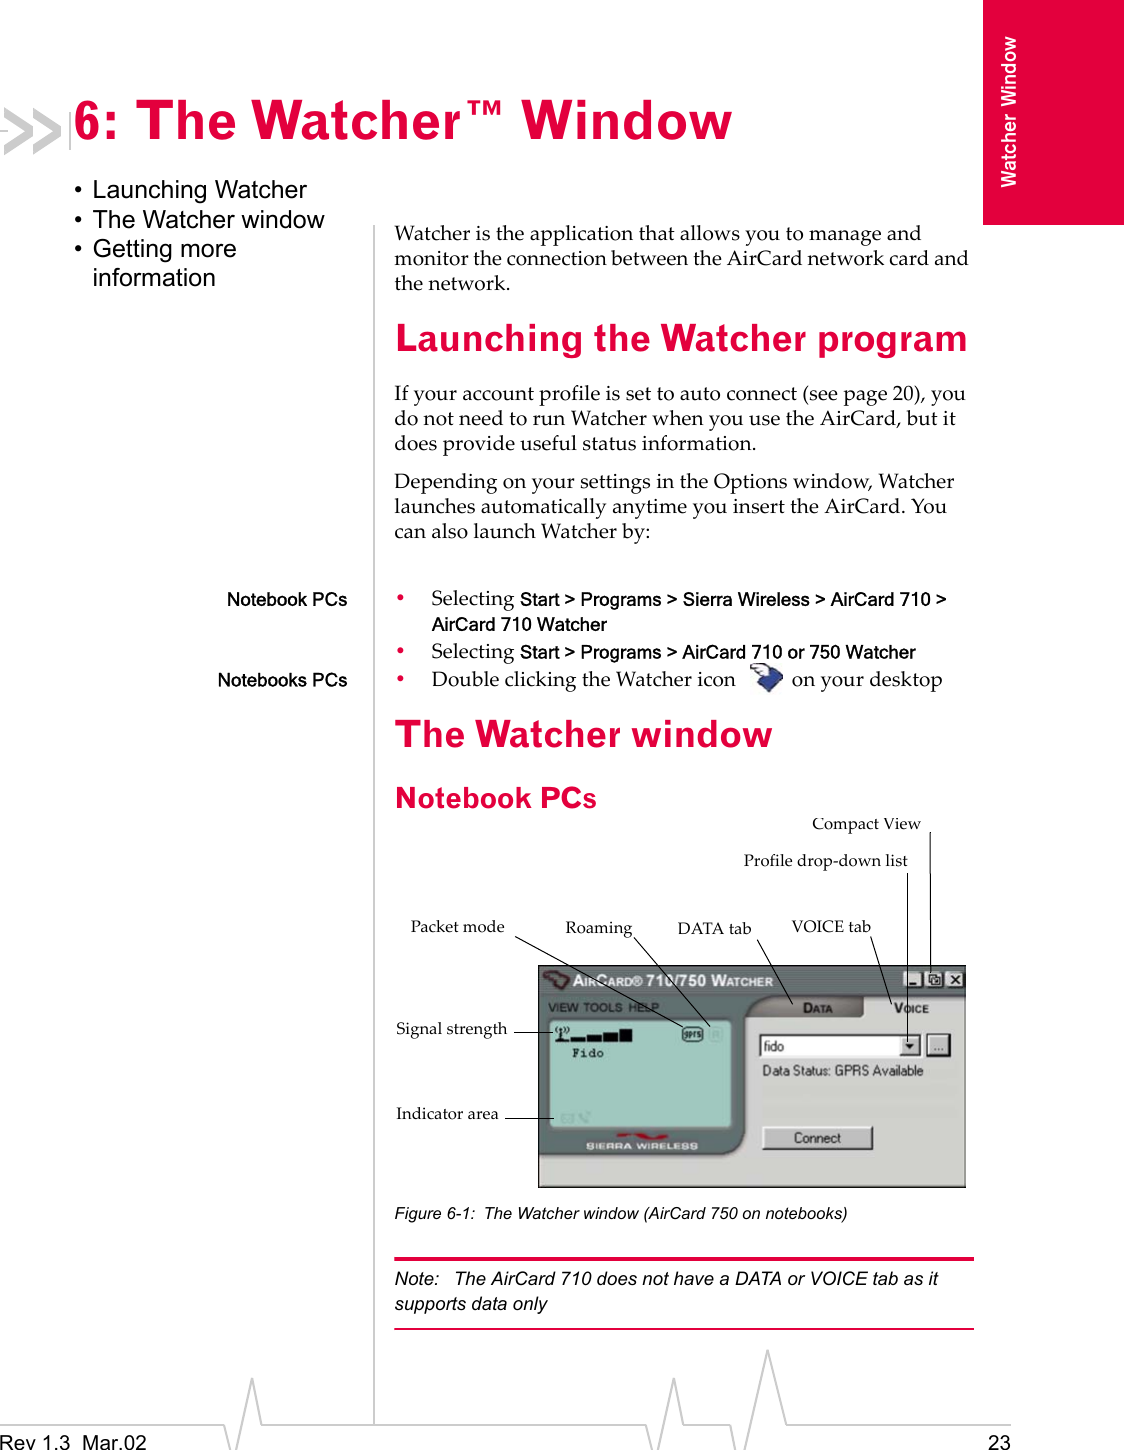 Rev 1.3  Mar.02 23Watcher Window6: The Watcher™ Window• Launching Watcher• The Watcher window• Getting more informationWatcher is the application that allows you to manage and monitor the connection between the AirCard network card and the network.Launching the Watcher programIf your account profile is set to auto connect (see page 20), you do not need to run Watcher when you use the AirCard, but it does provide useful status information.Depending on your settings in the Options window, Watcher launches automatically anytime you insert the AirCard. You can also launch Watcher by:Notebook PCs •Selecting Start &gt; Programs &gt; Sierra Wireless &gt; AirCard 710 &gt; AirCard 710 Watcher•Selecting Start &gt; Programs &gt; AirCard 710 or 750 WatcherNotebooks PCs •Double clicking the Watcher icon  on your desktopThe Watcher windowNotebook PCs Figure 6-1: The Watcher window (AirCard 750 on notebooks)Note:  The AirCard 710 does not have a DATA or VOICE tab as it supports data onlyIndicator areaProfile drop-down listRoamingPacket modeCompact ViewSignal strengthDATA tab VOICE tab